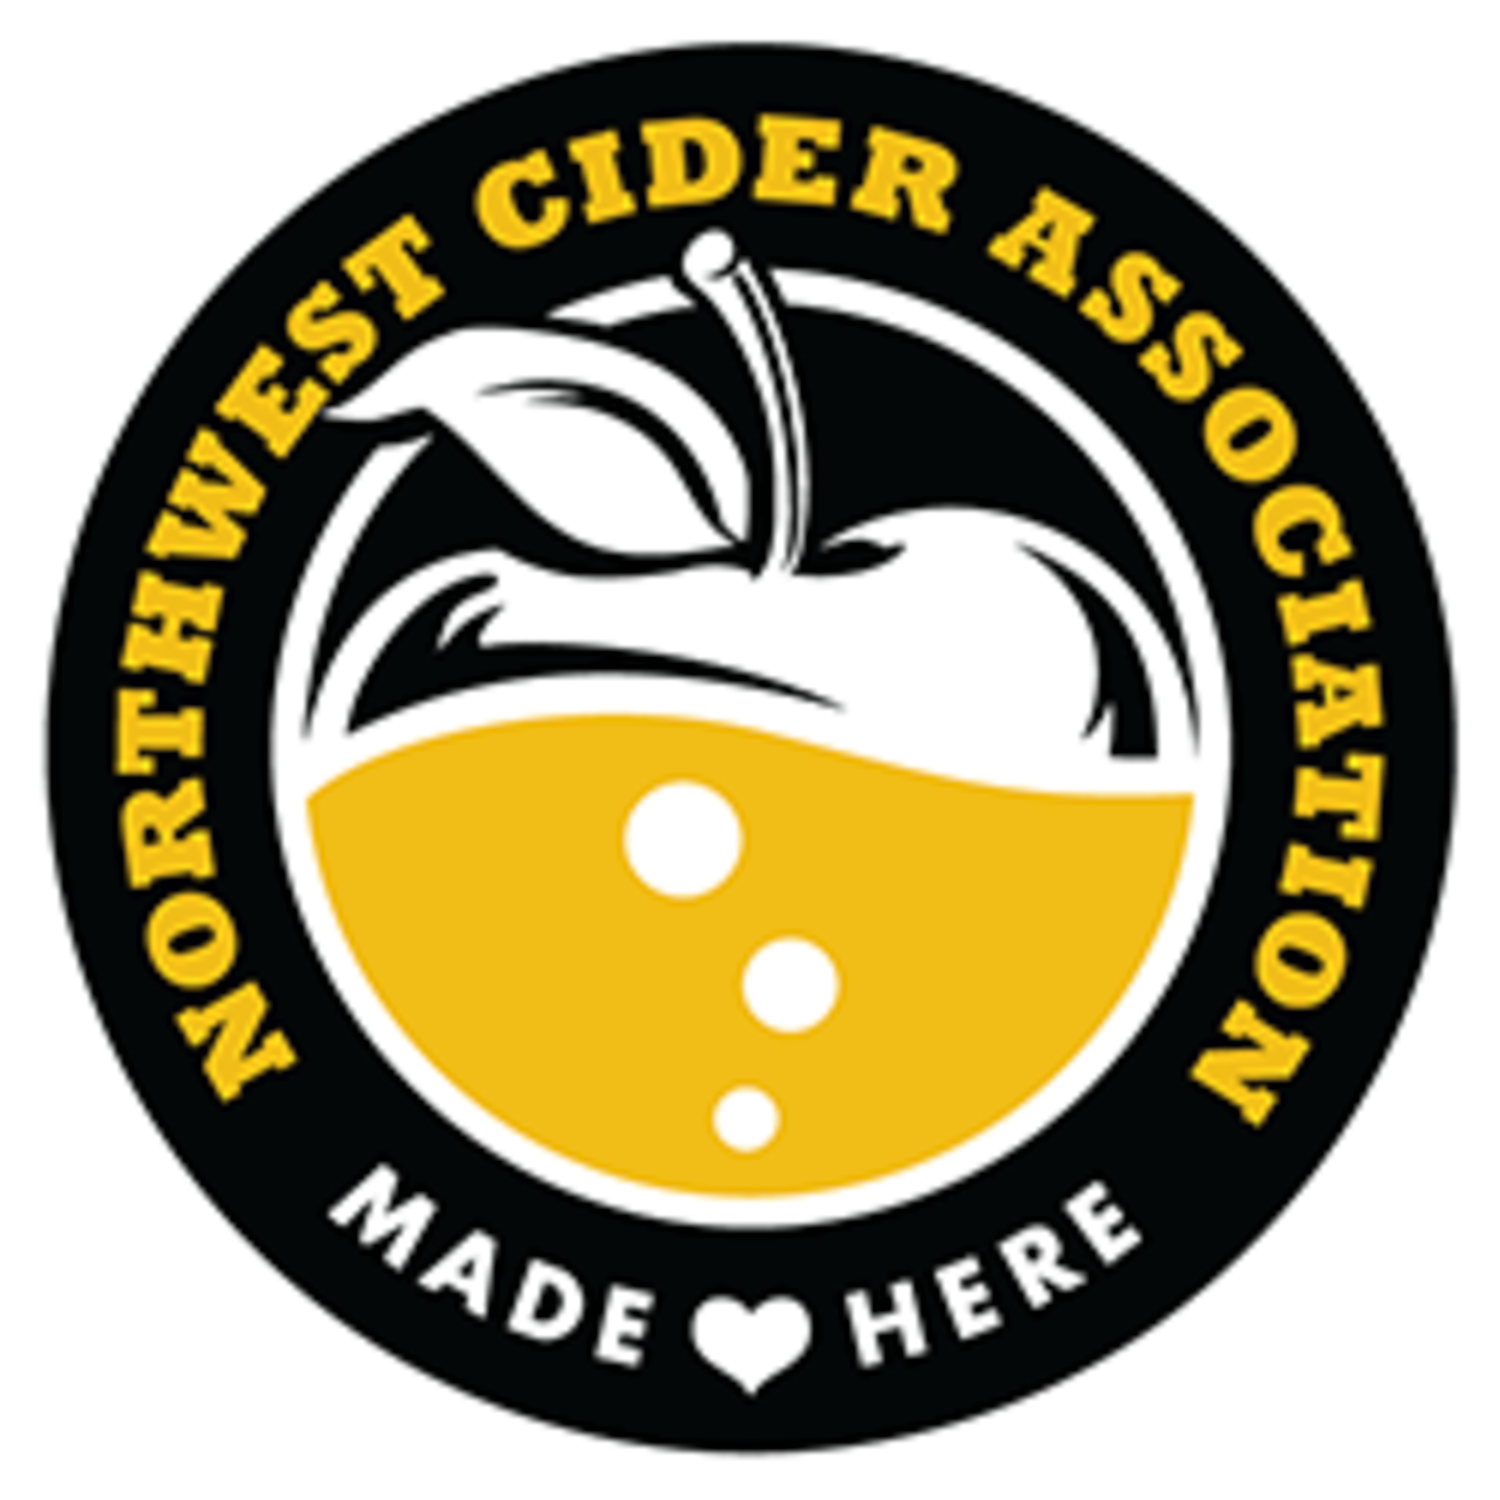 Northwest Cider Club Emily Ritchie & Jana Daisy-Ensign– Craft Beer Podcast Episode 134 by Steven Shomler